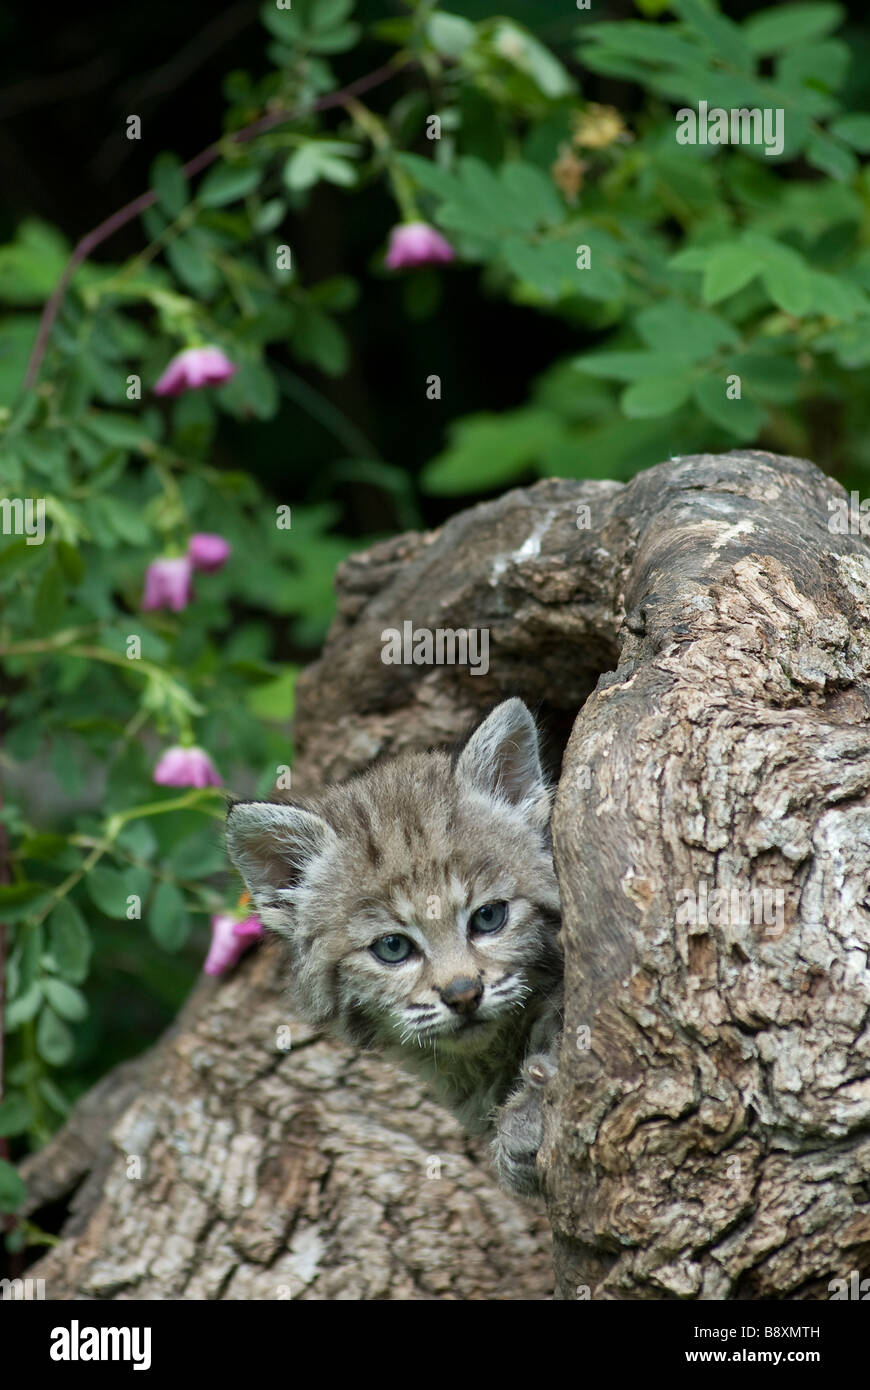 Bobcat kitten in log Felis rufus controlled conditions Stock Photo